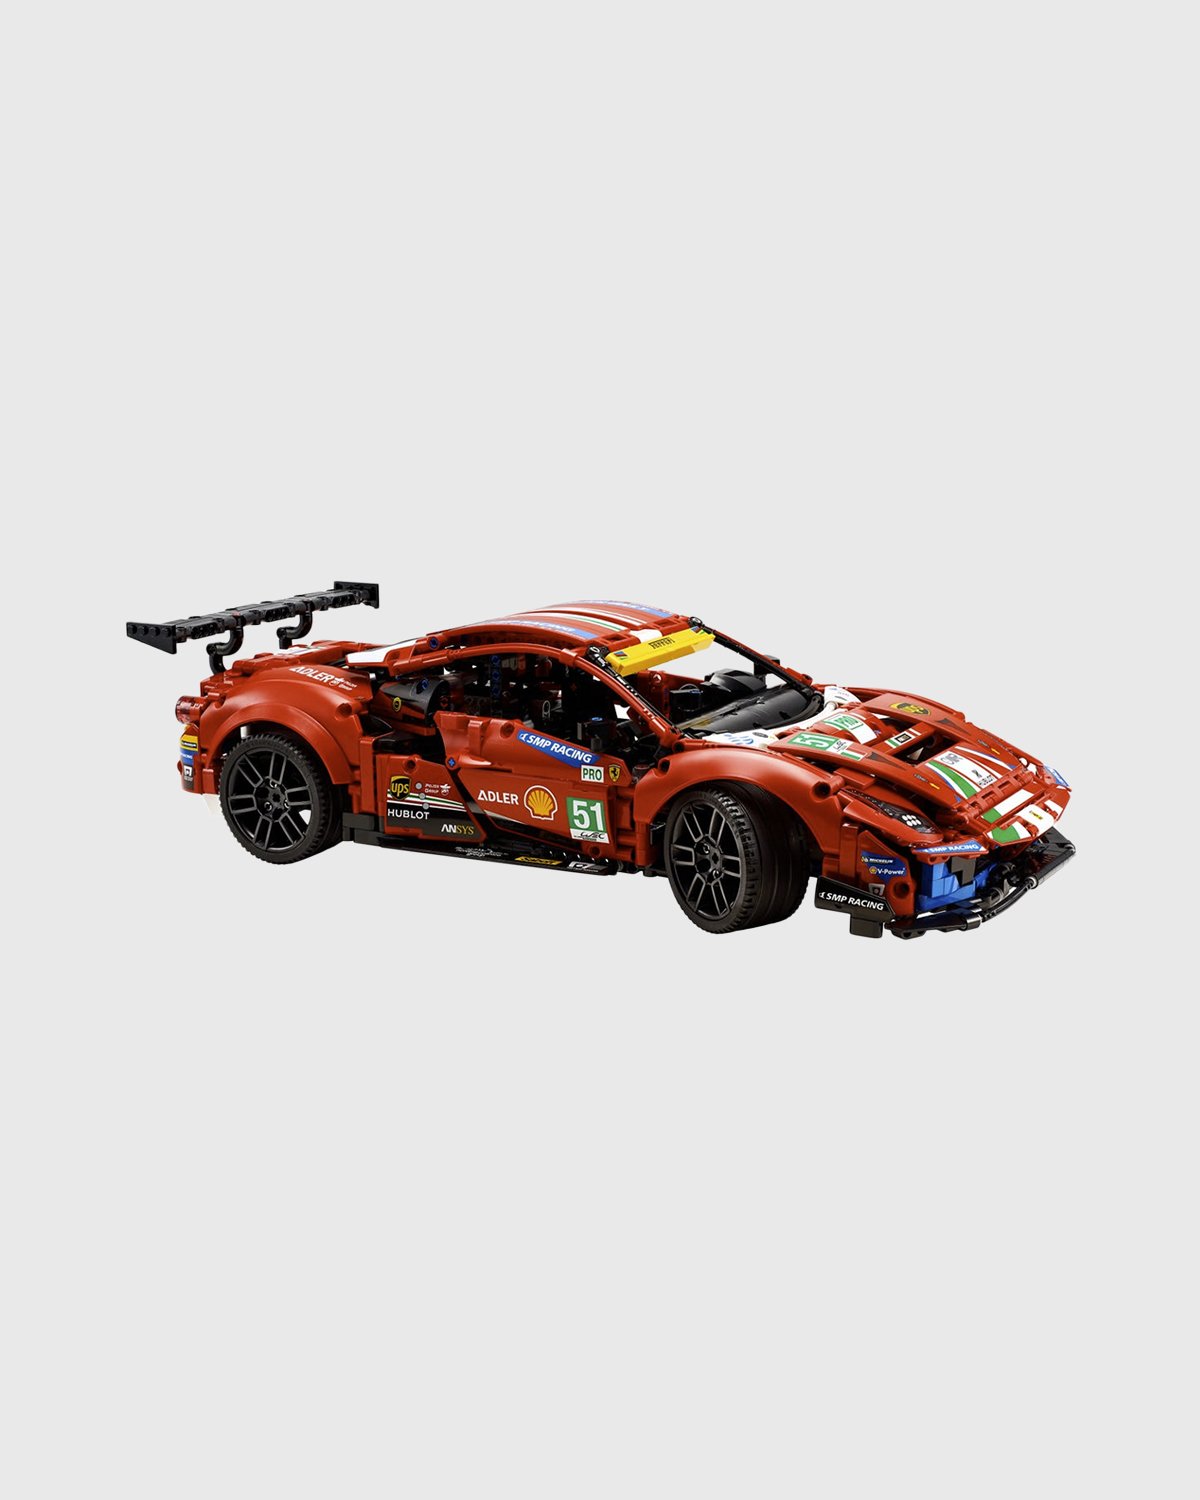 Lego - Technic Ferrari 488 GTE AF Corse 51 Red - Lifestyle - Red - Image 1